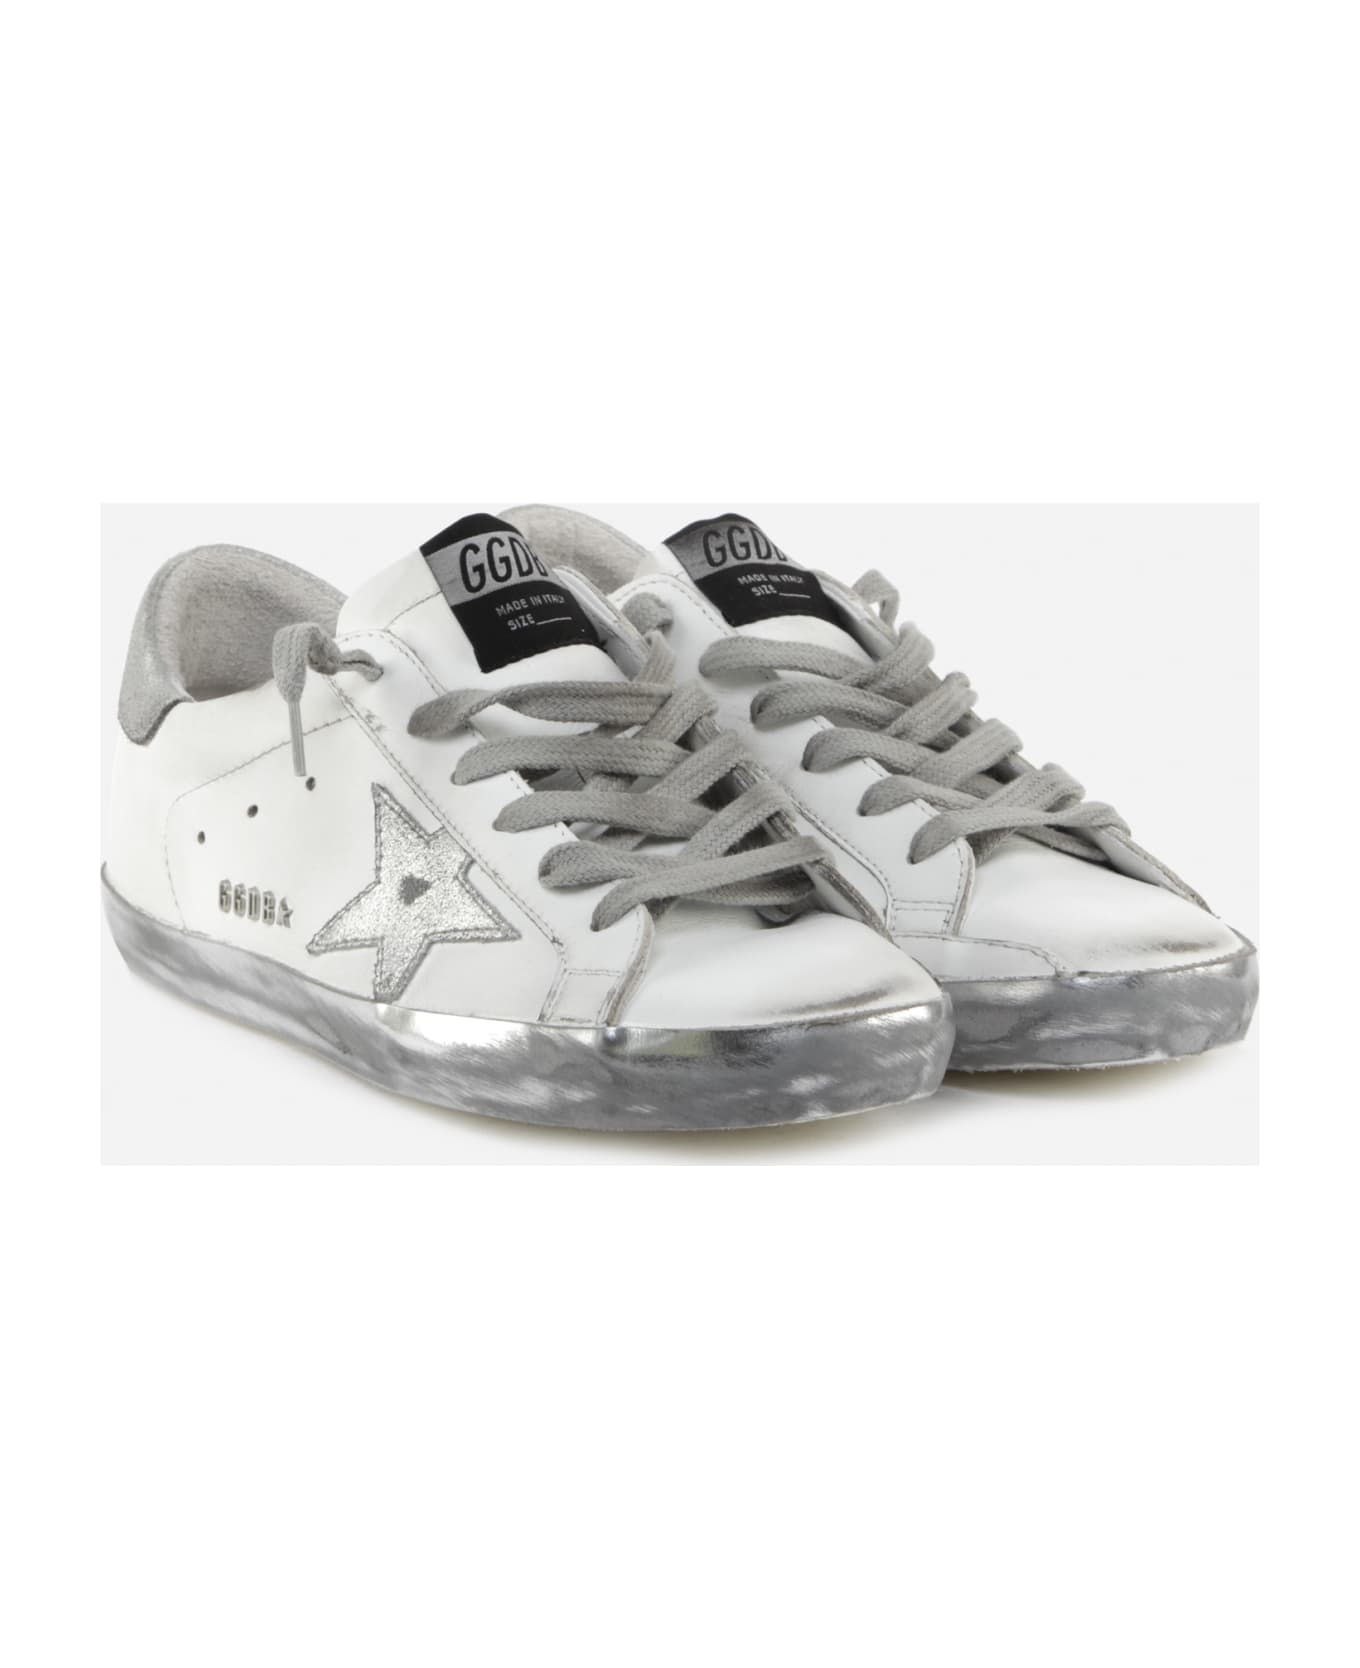 Golden Goose Superstar Sneakers With Laminated Leather Details - White